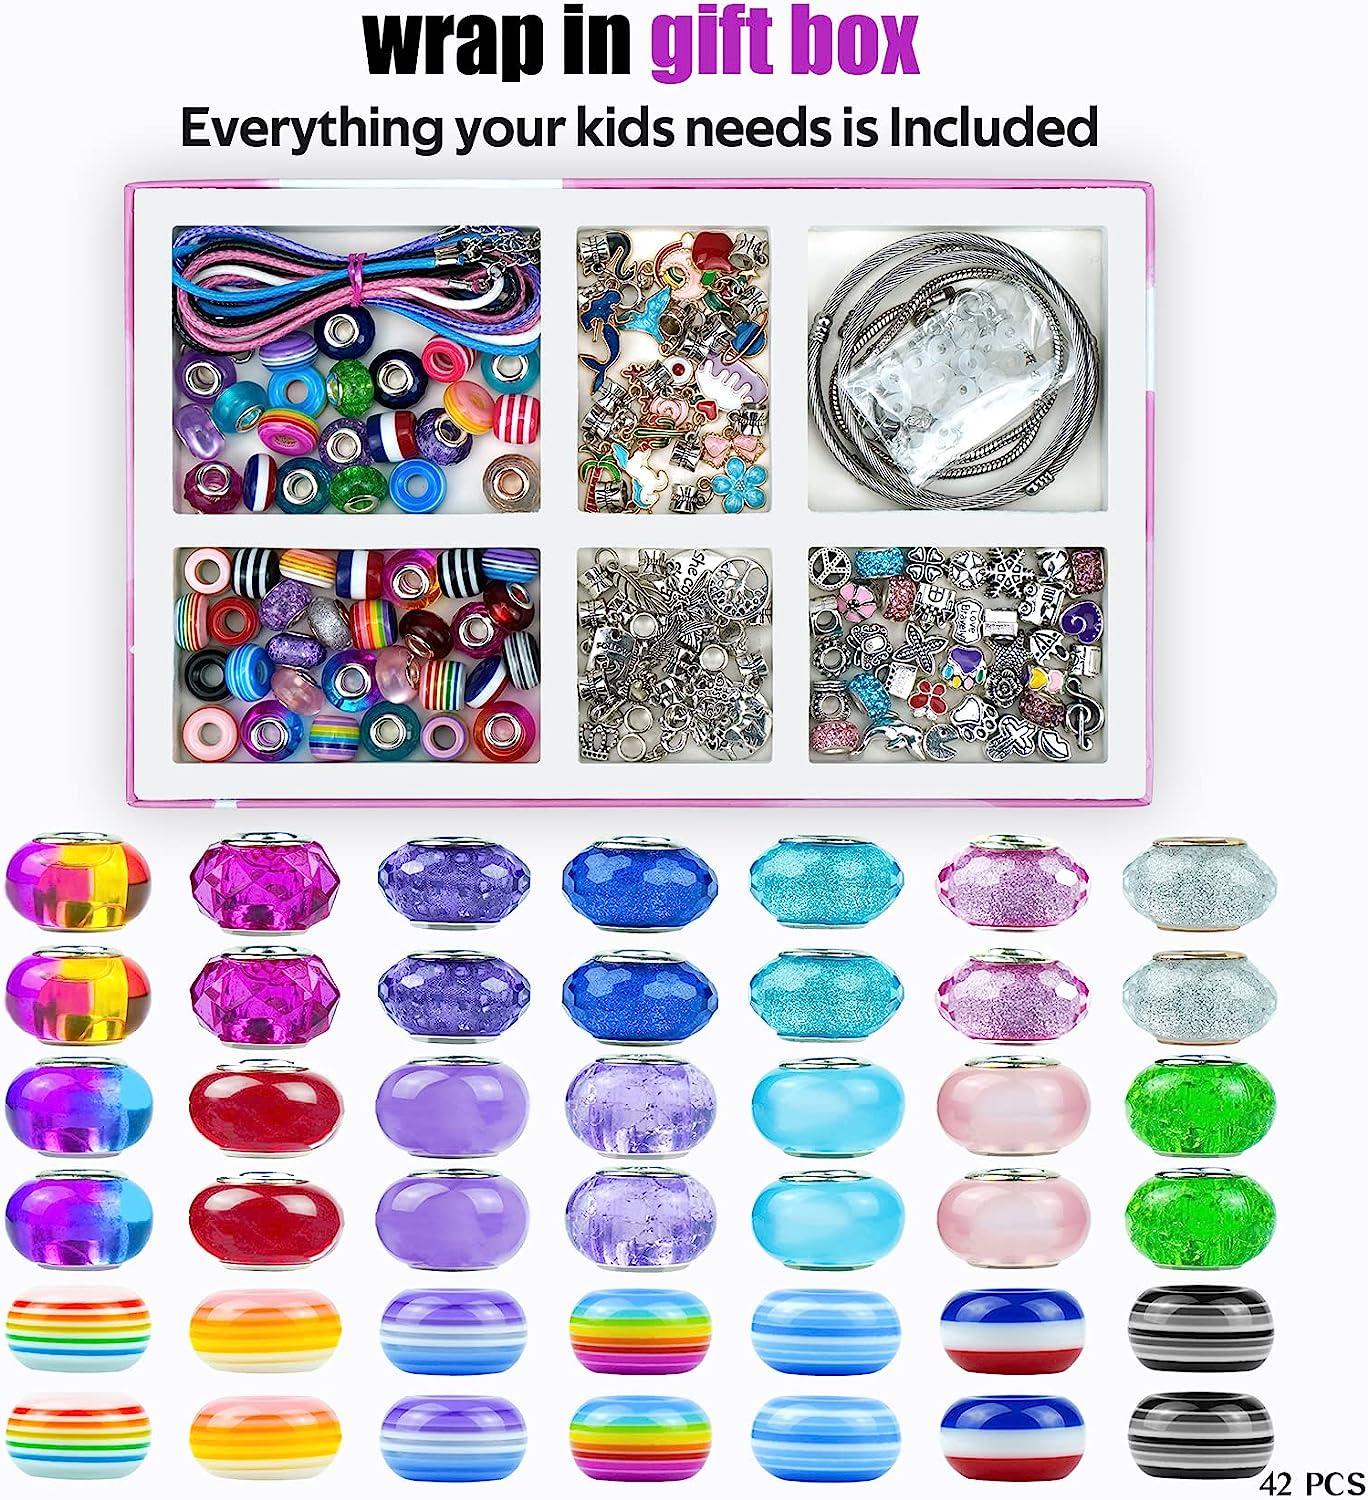 Craft Gifts for 8 9 10 Year Old Girls, DIY Kids Arts Kits for 8 9 10 11 12  Year Old Girls Birthday Gifts Resin Silicone Jewelry Making Kit Sets for